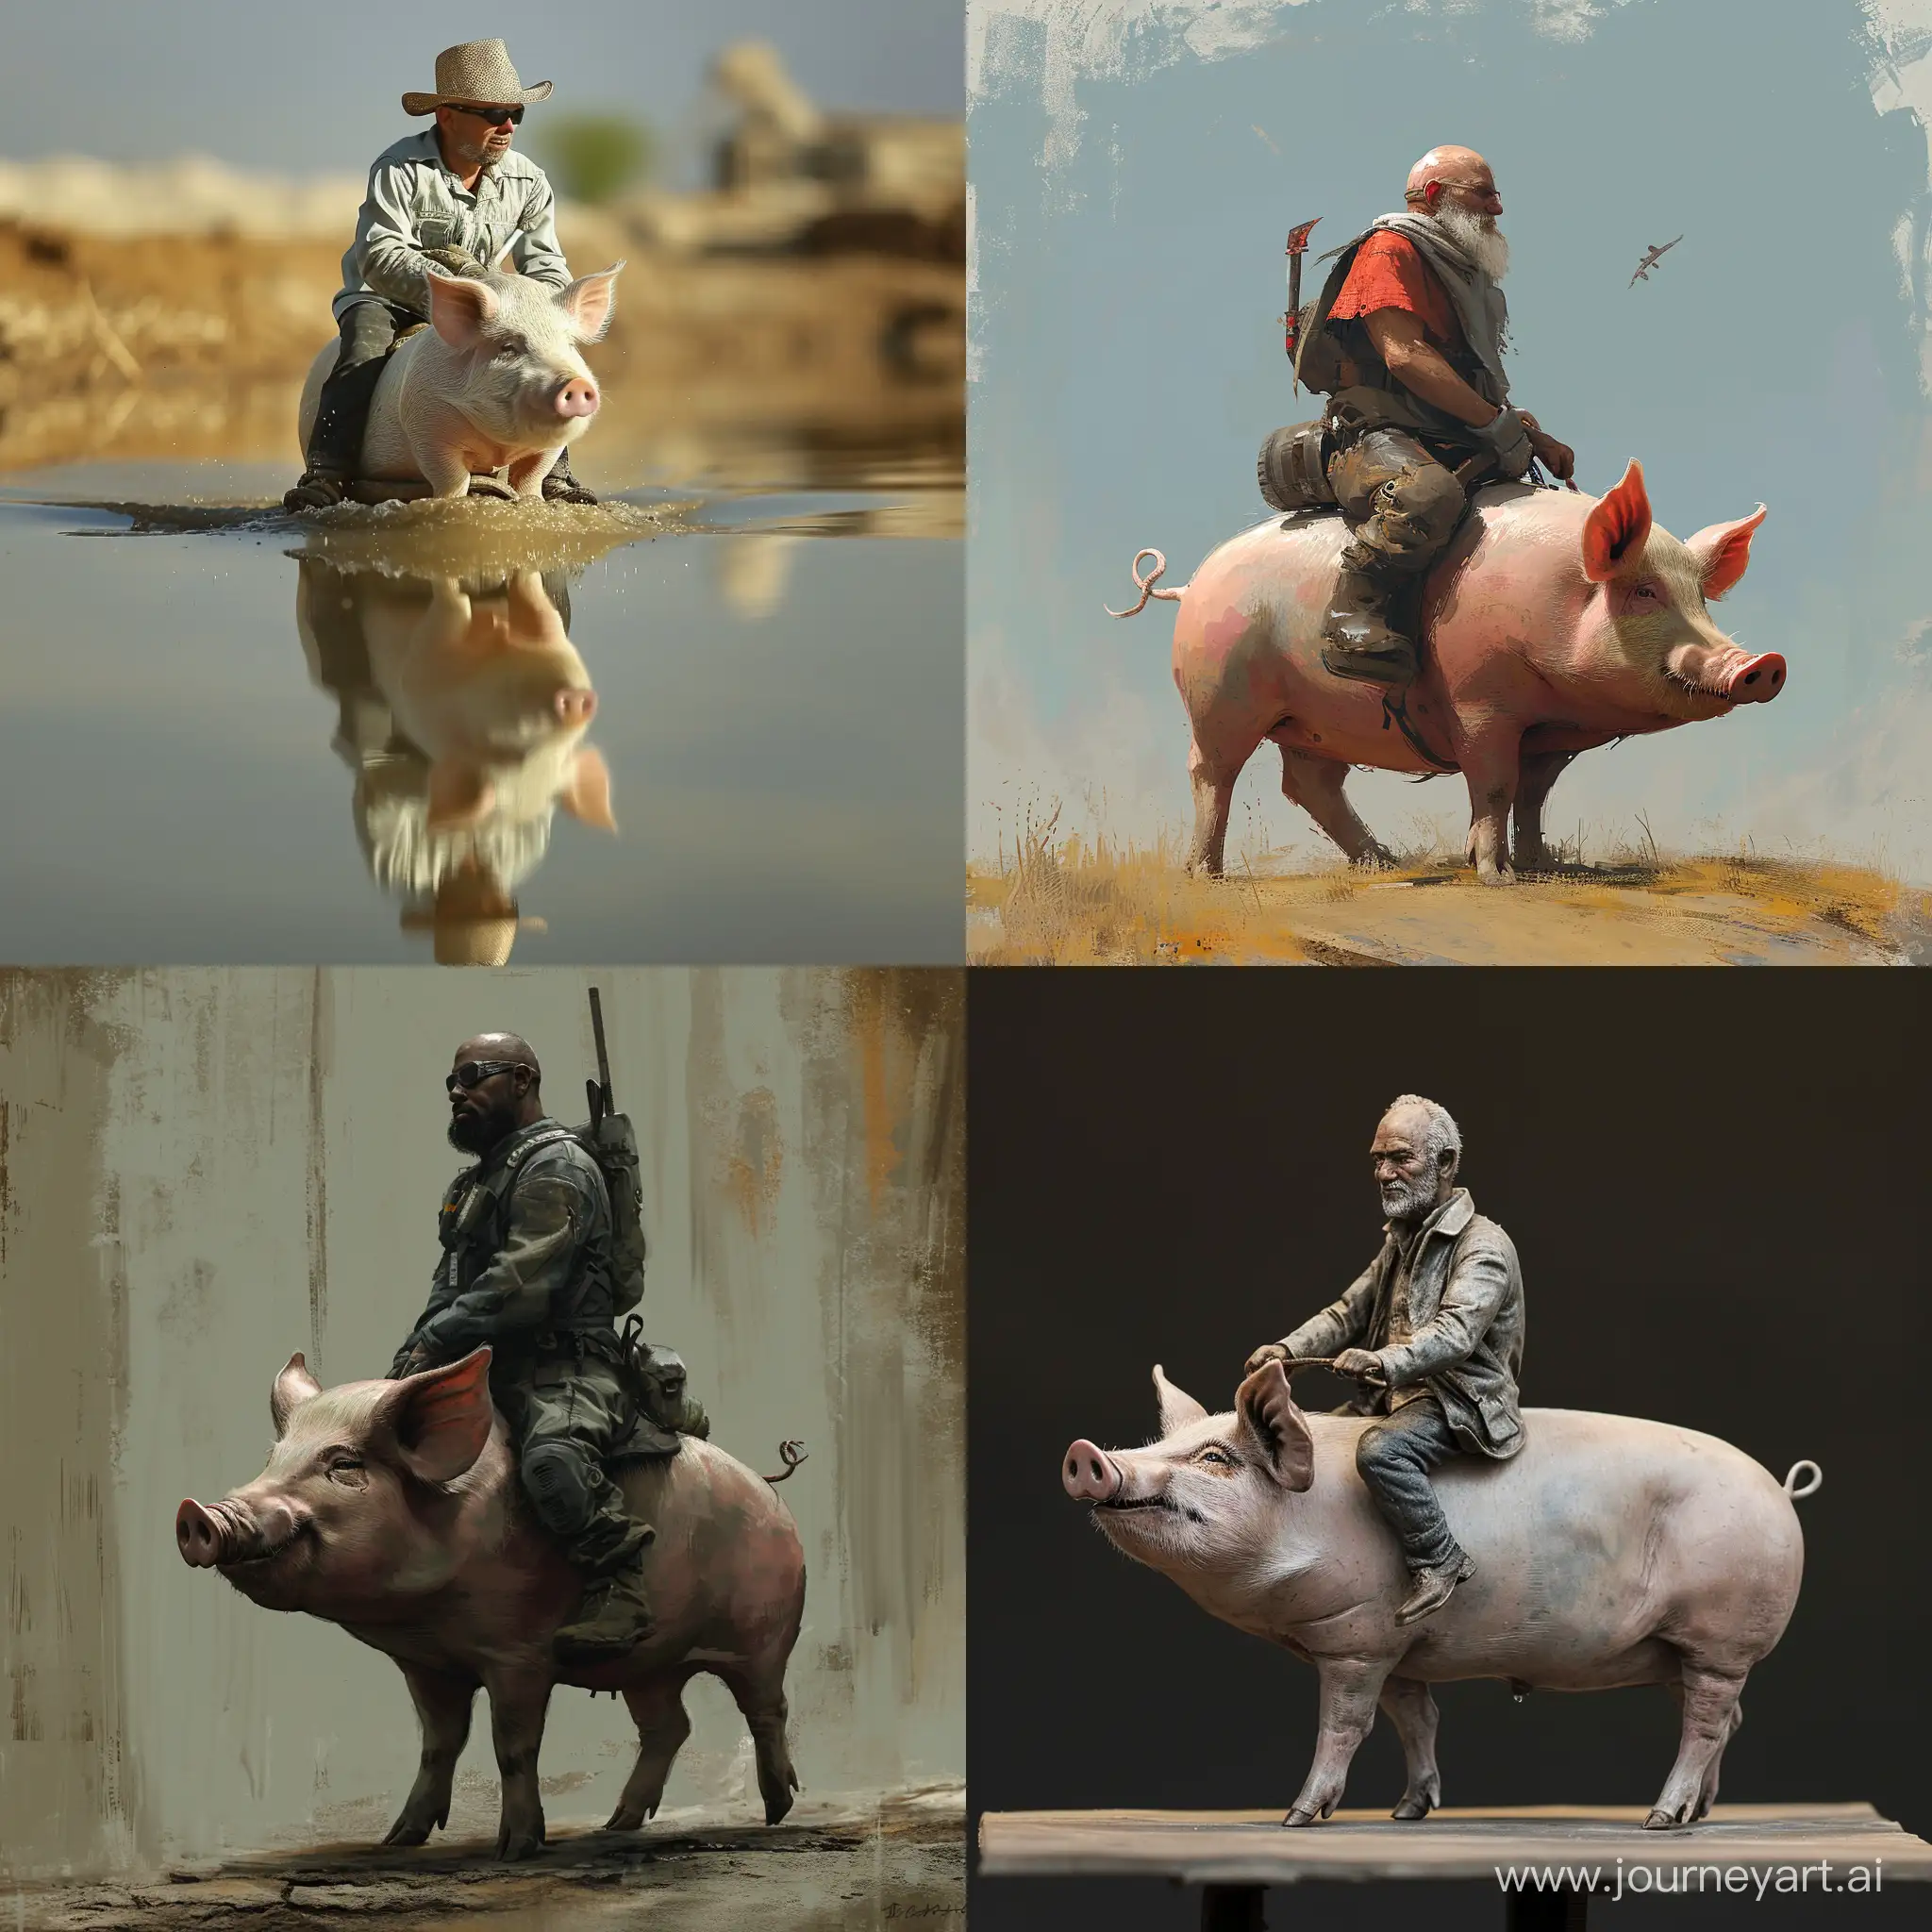 Man-Riding-Pig-Whimsical-Adventure-with-a-Playful-Twist